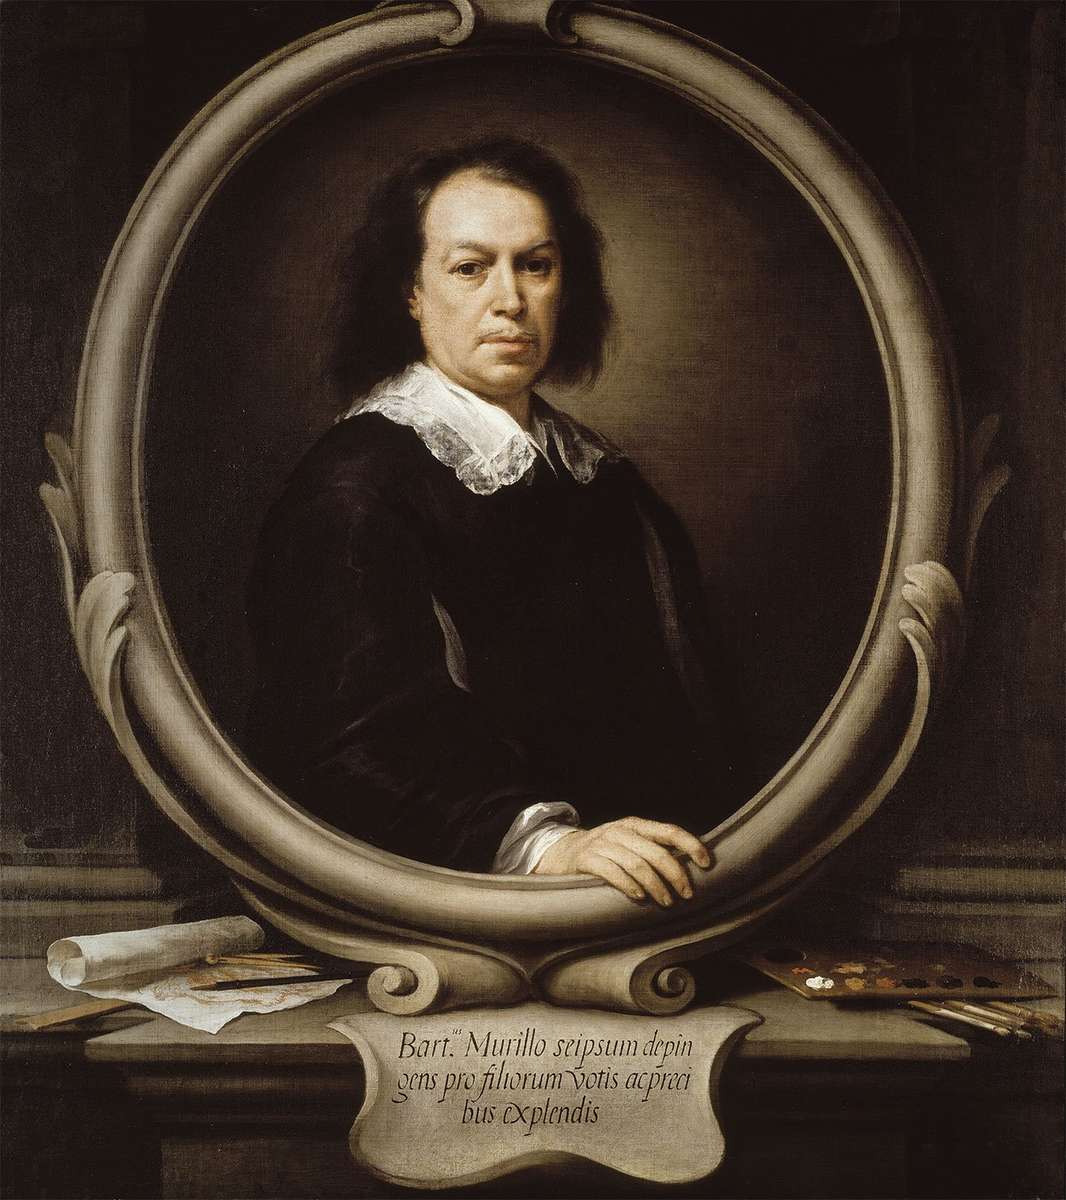 SELF-PORTRAIT OF MURILLO puzzle online from photo